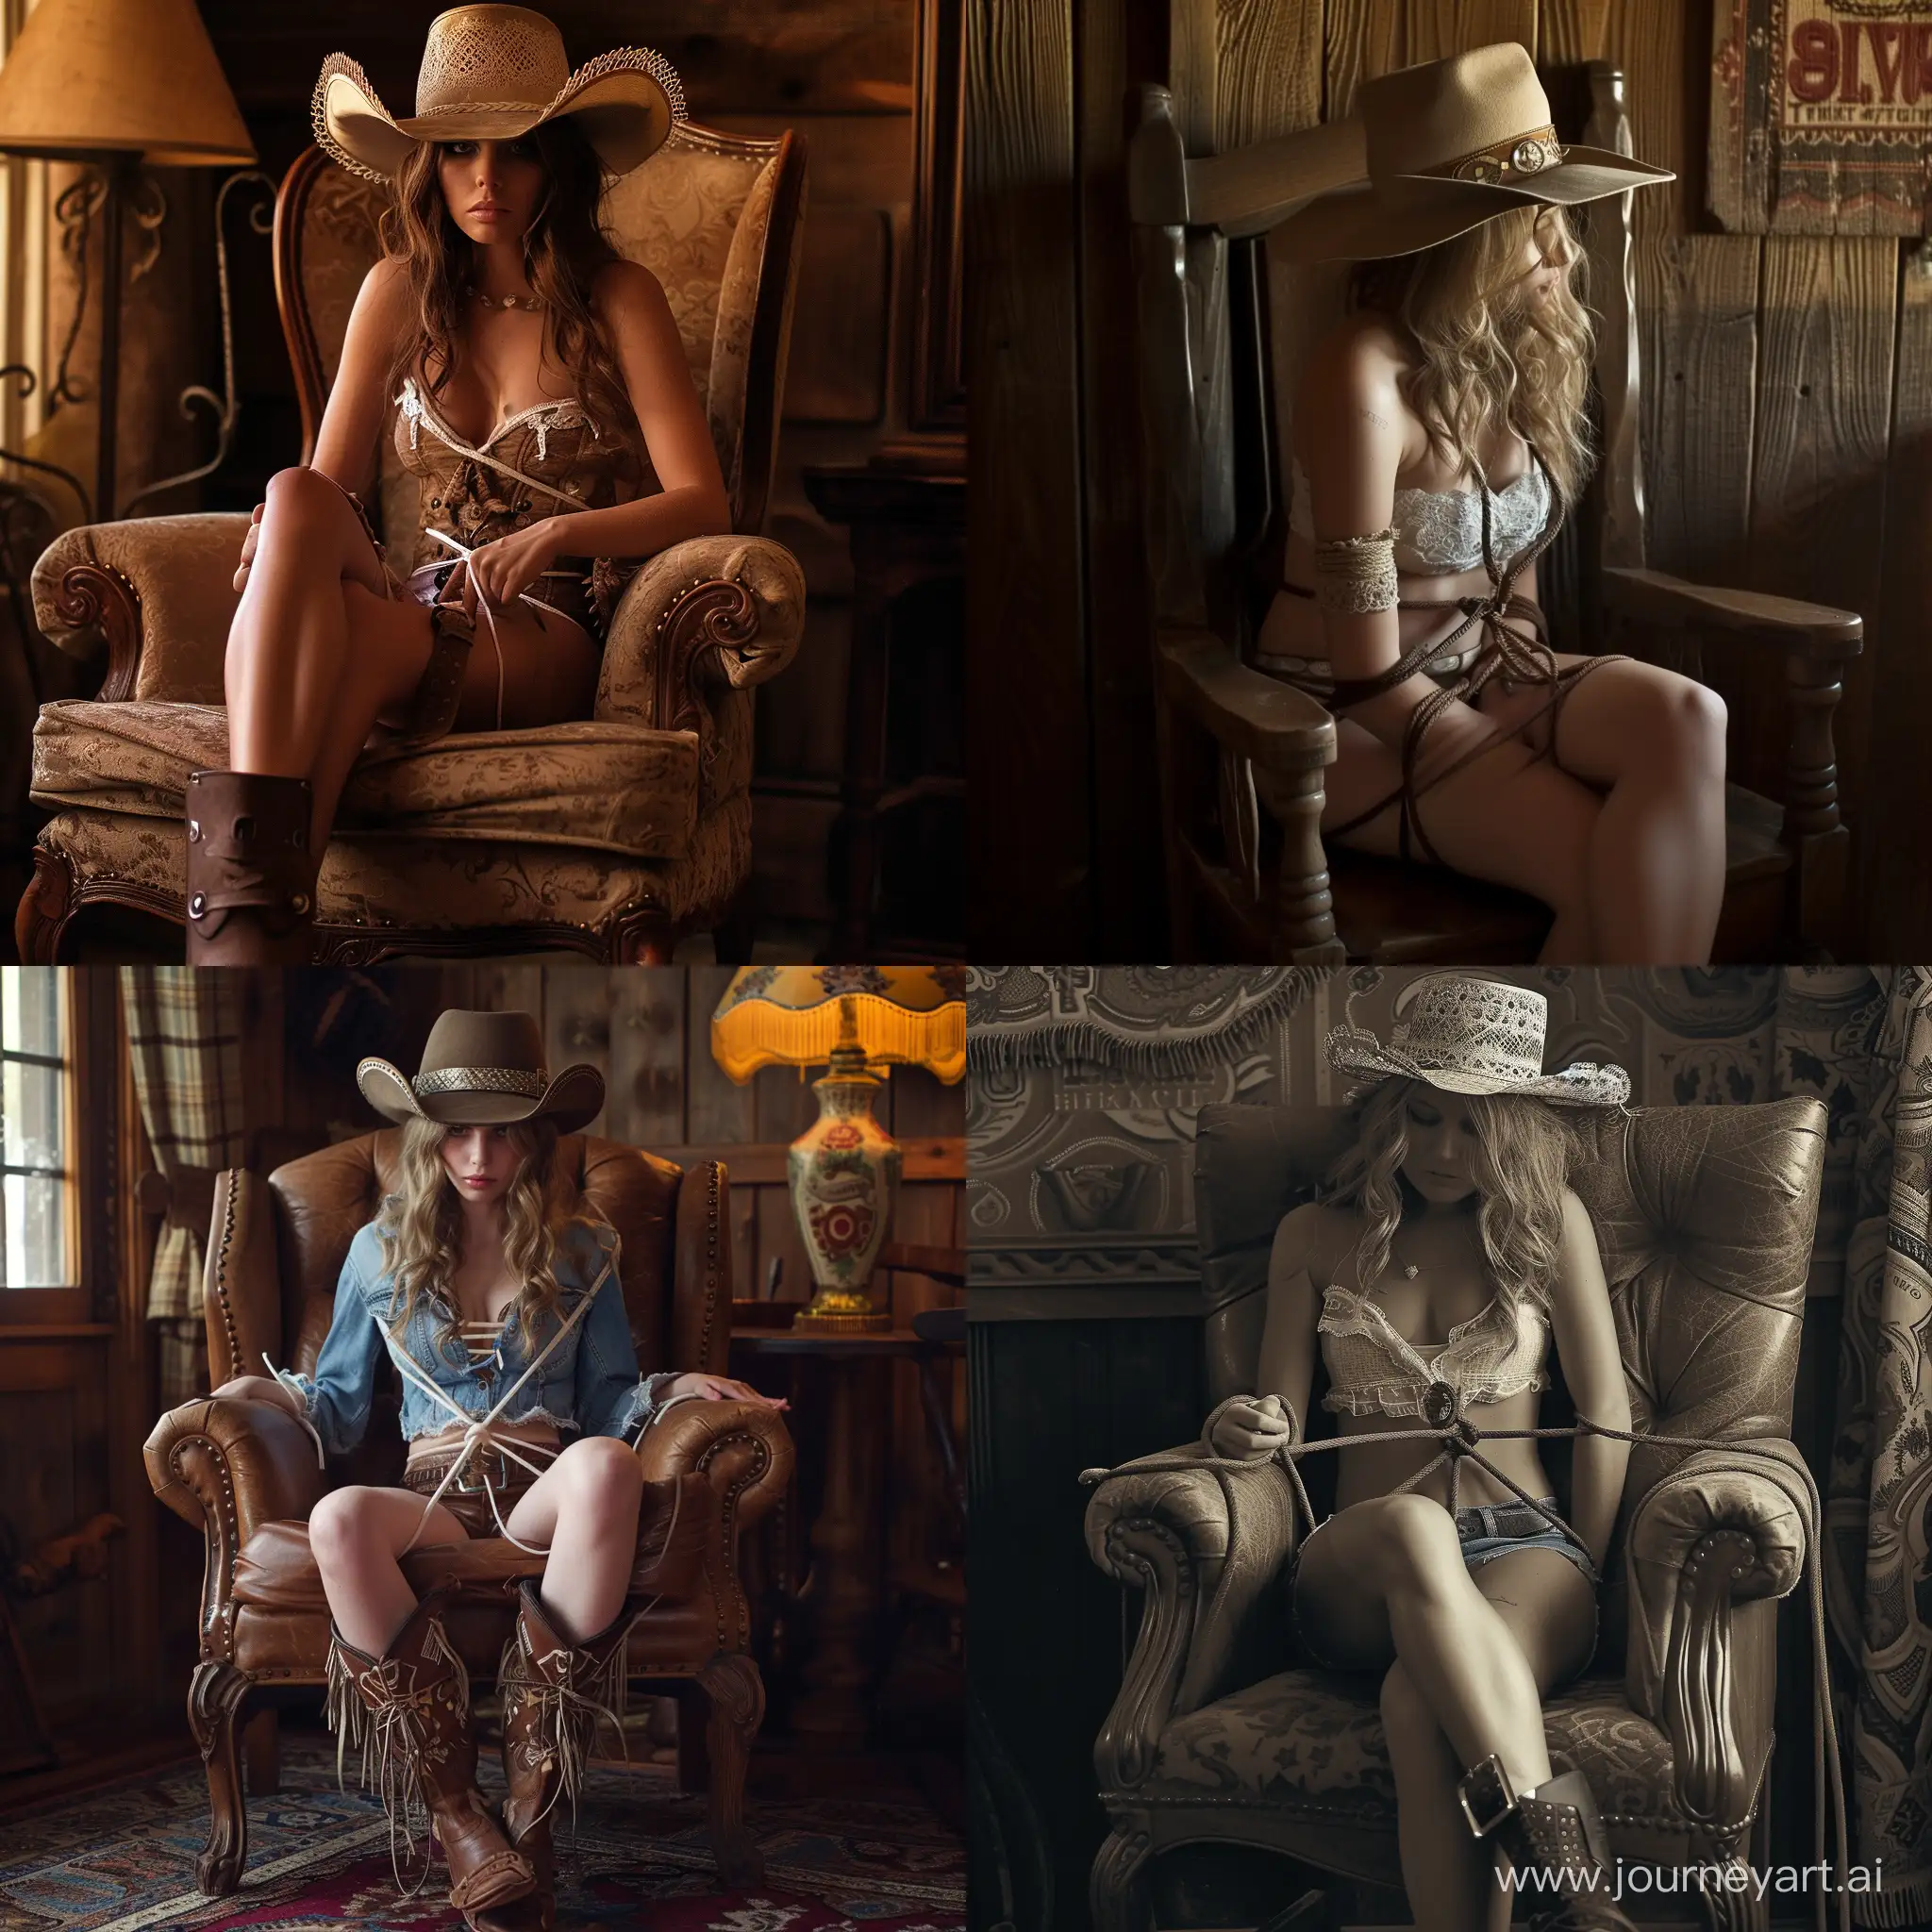 Rustic-Cowgirl-Tied-Up-on-Saloon-Chair-in-a-Western-Setting